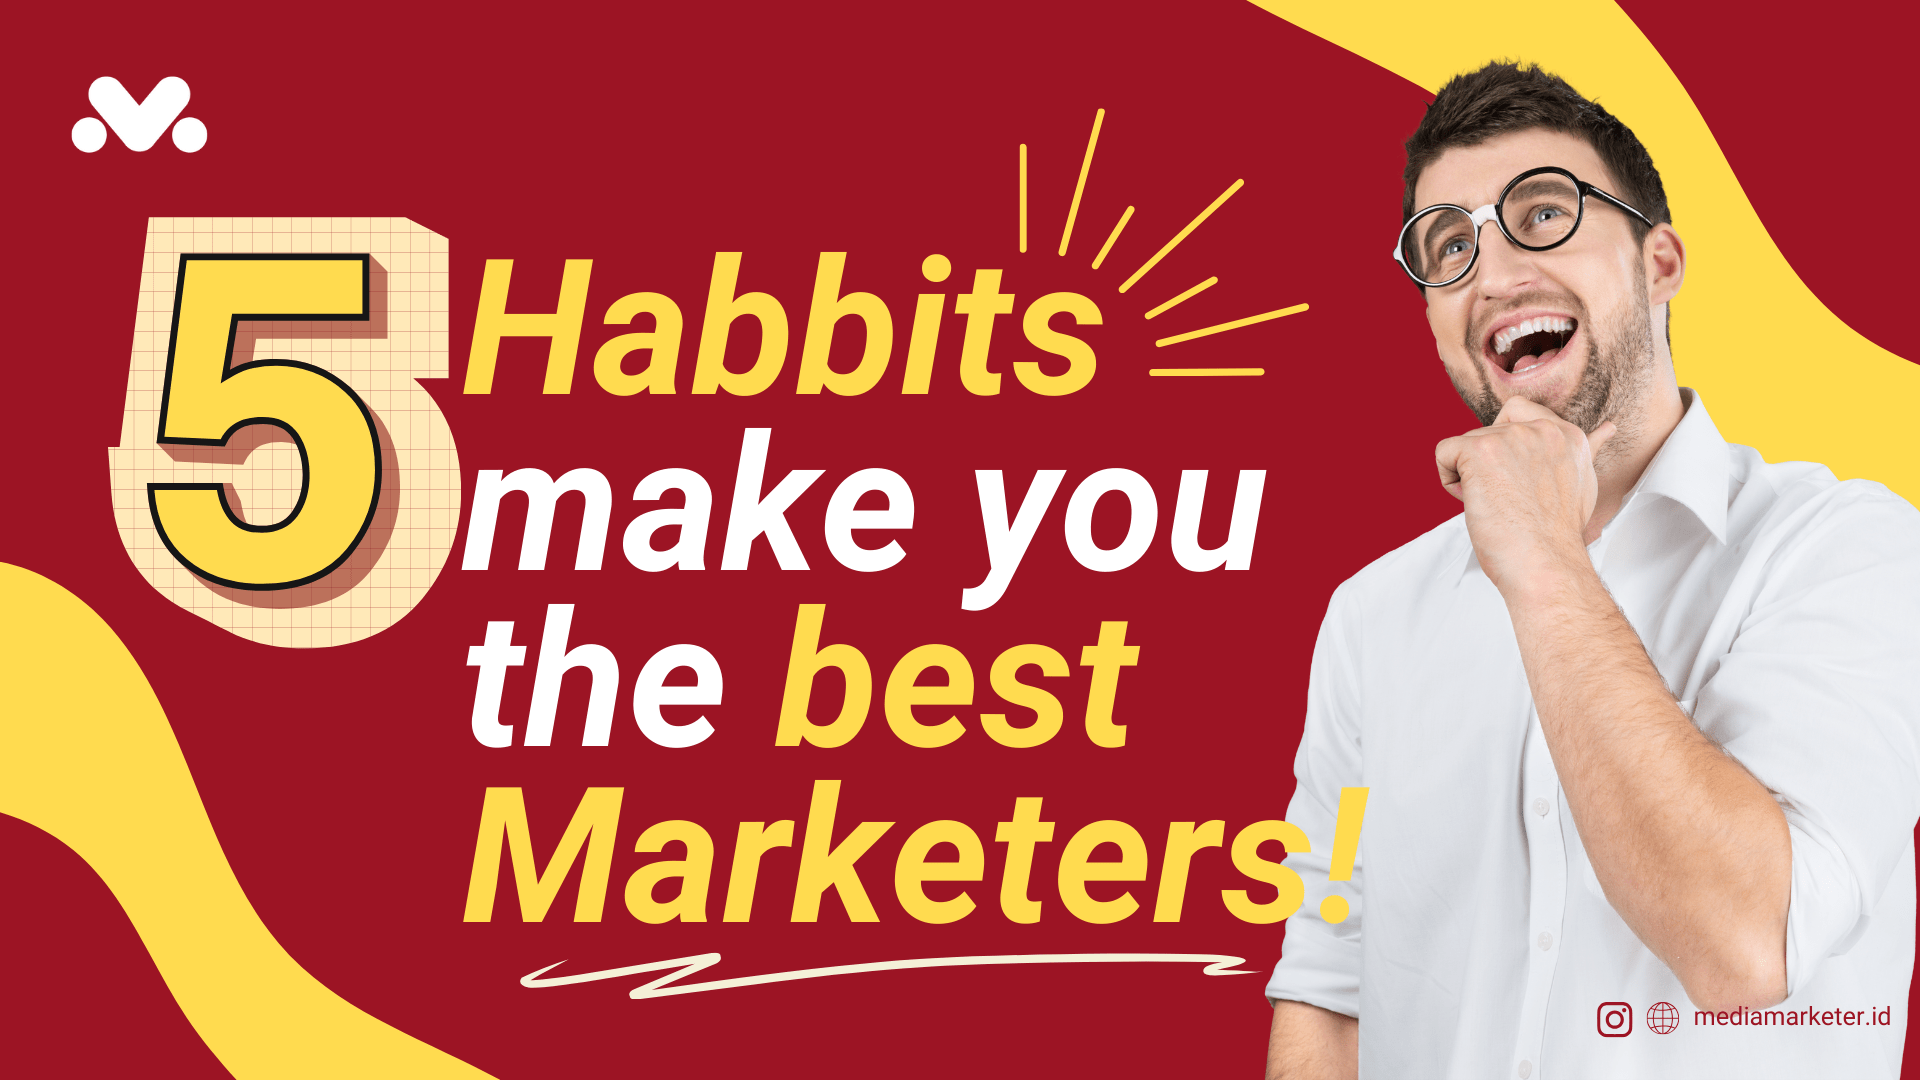 5 Habbits Make You the Best Marketers